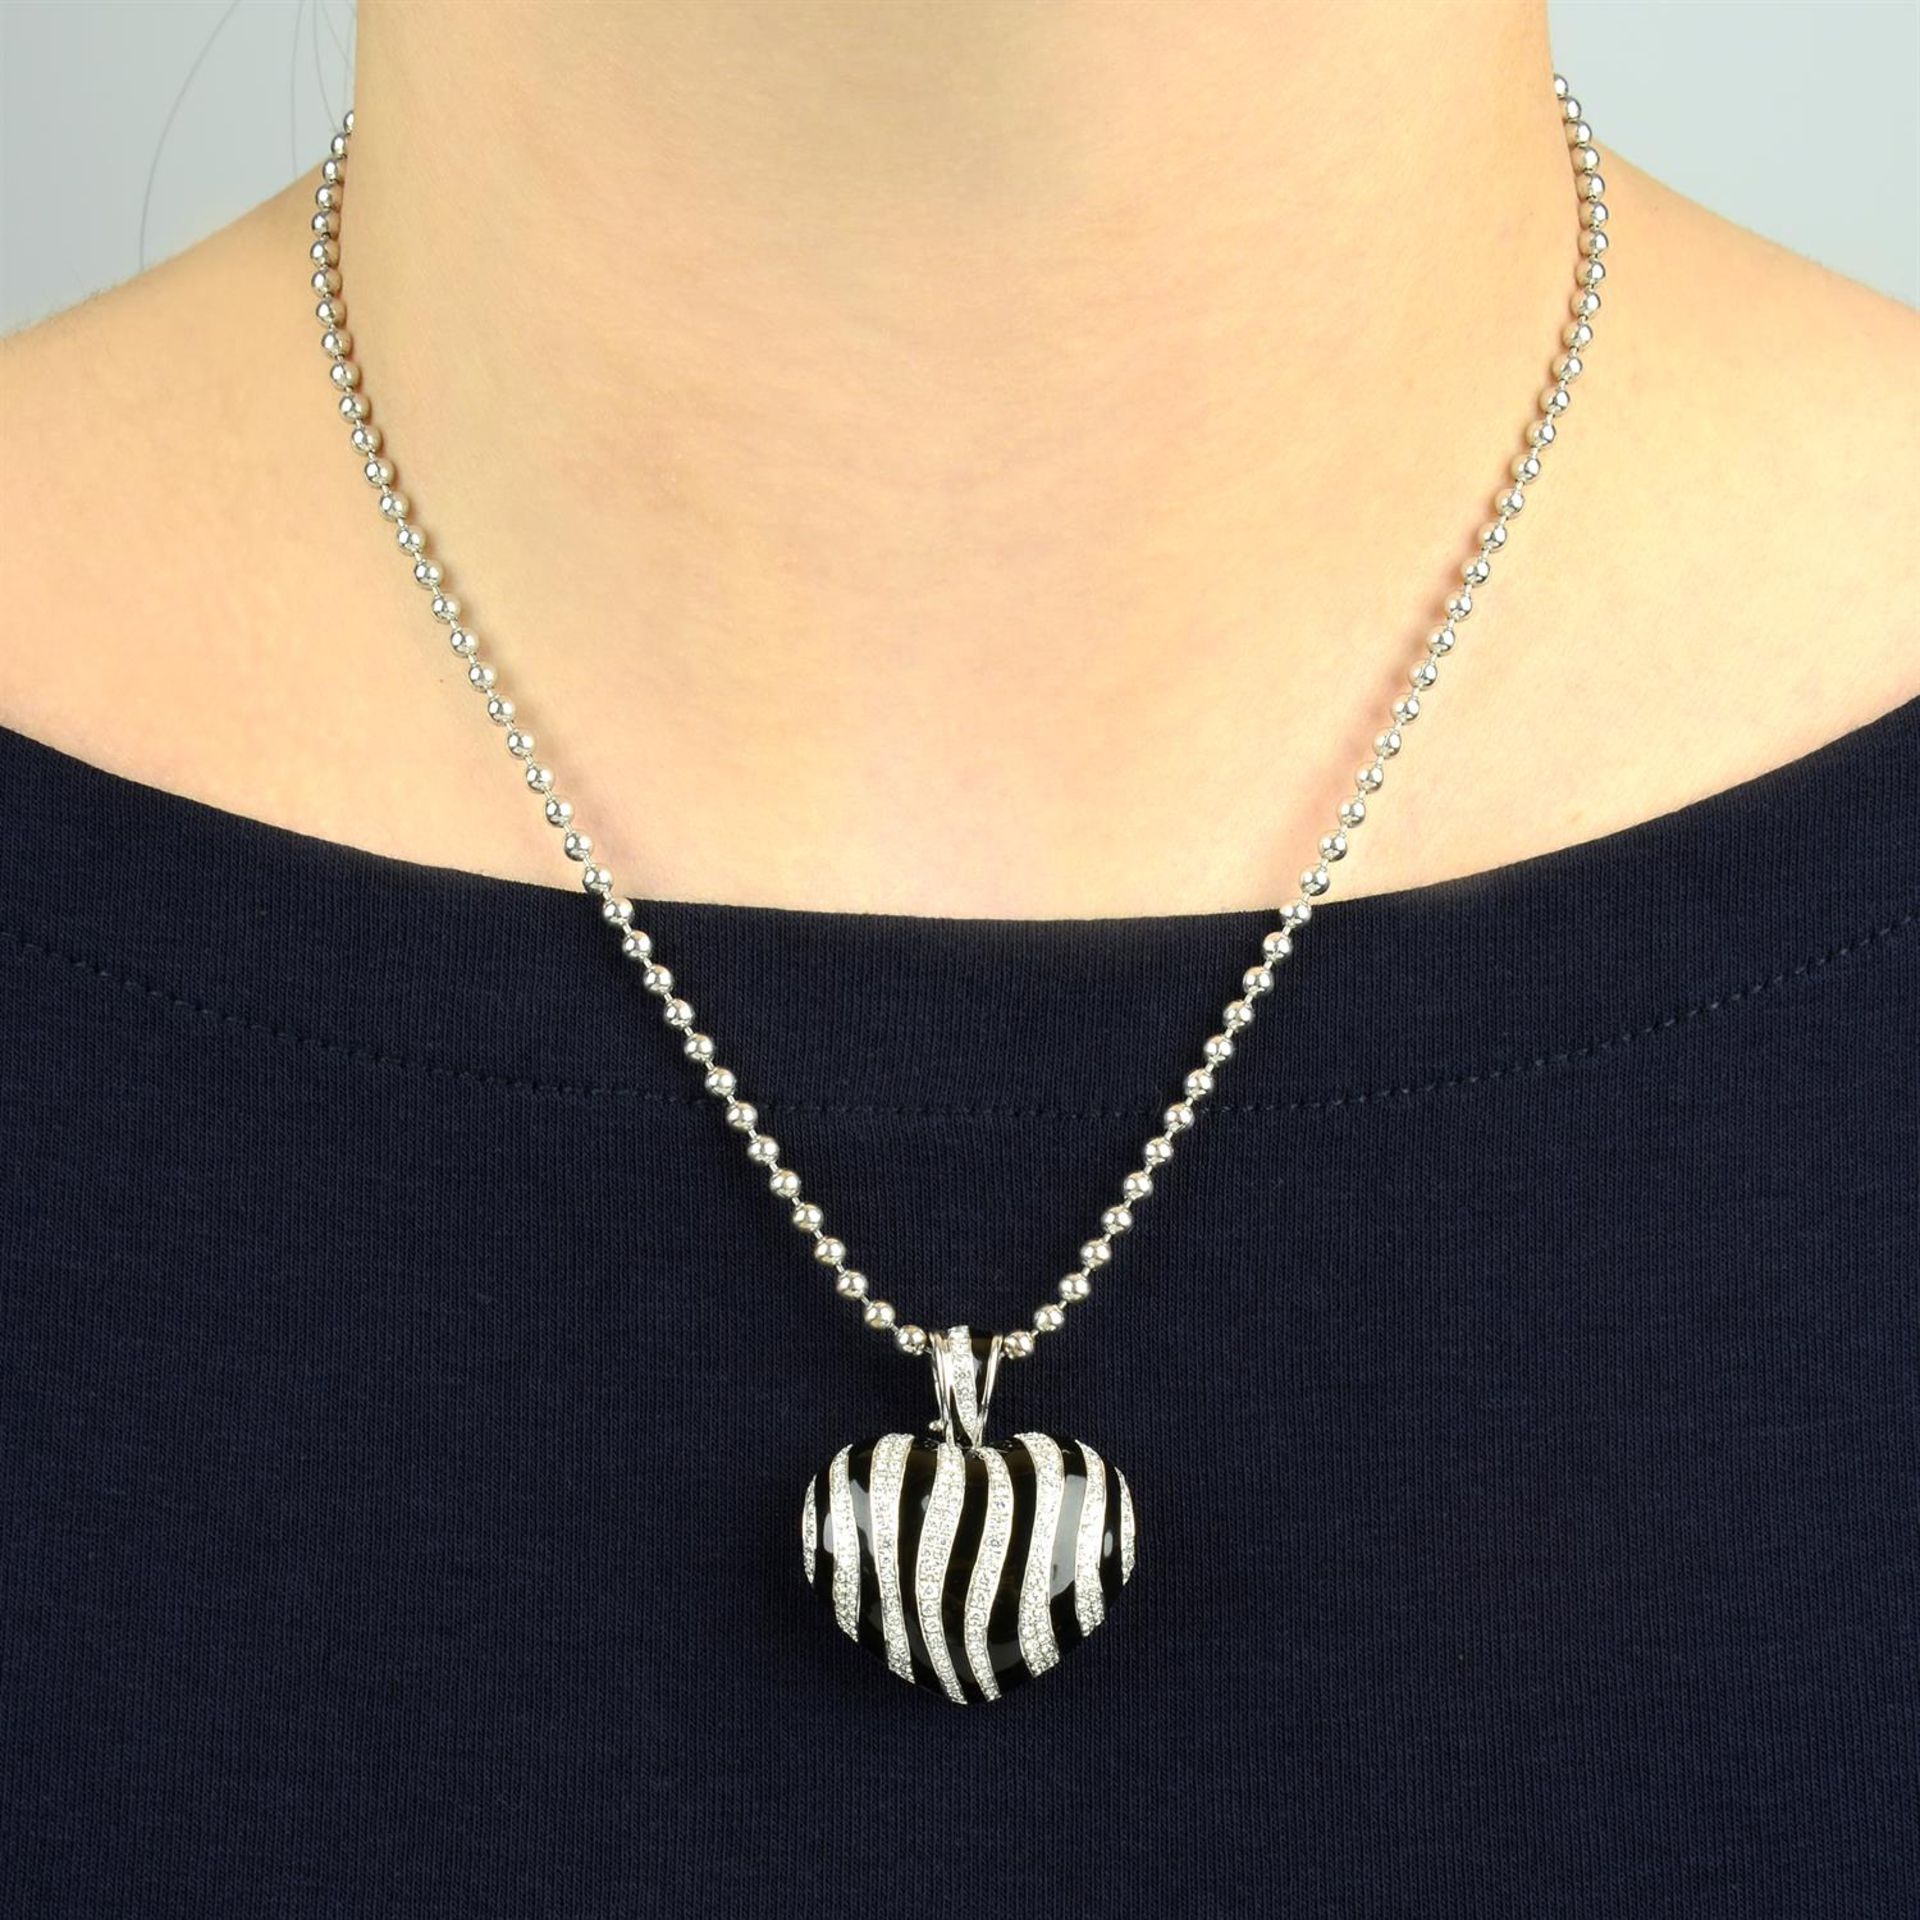 An 18ct gold pavé-set diamond and undulating black enamel striped heart pendant, with bead-link - Image 5 of 5